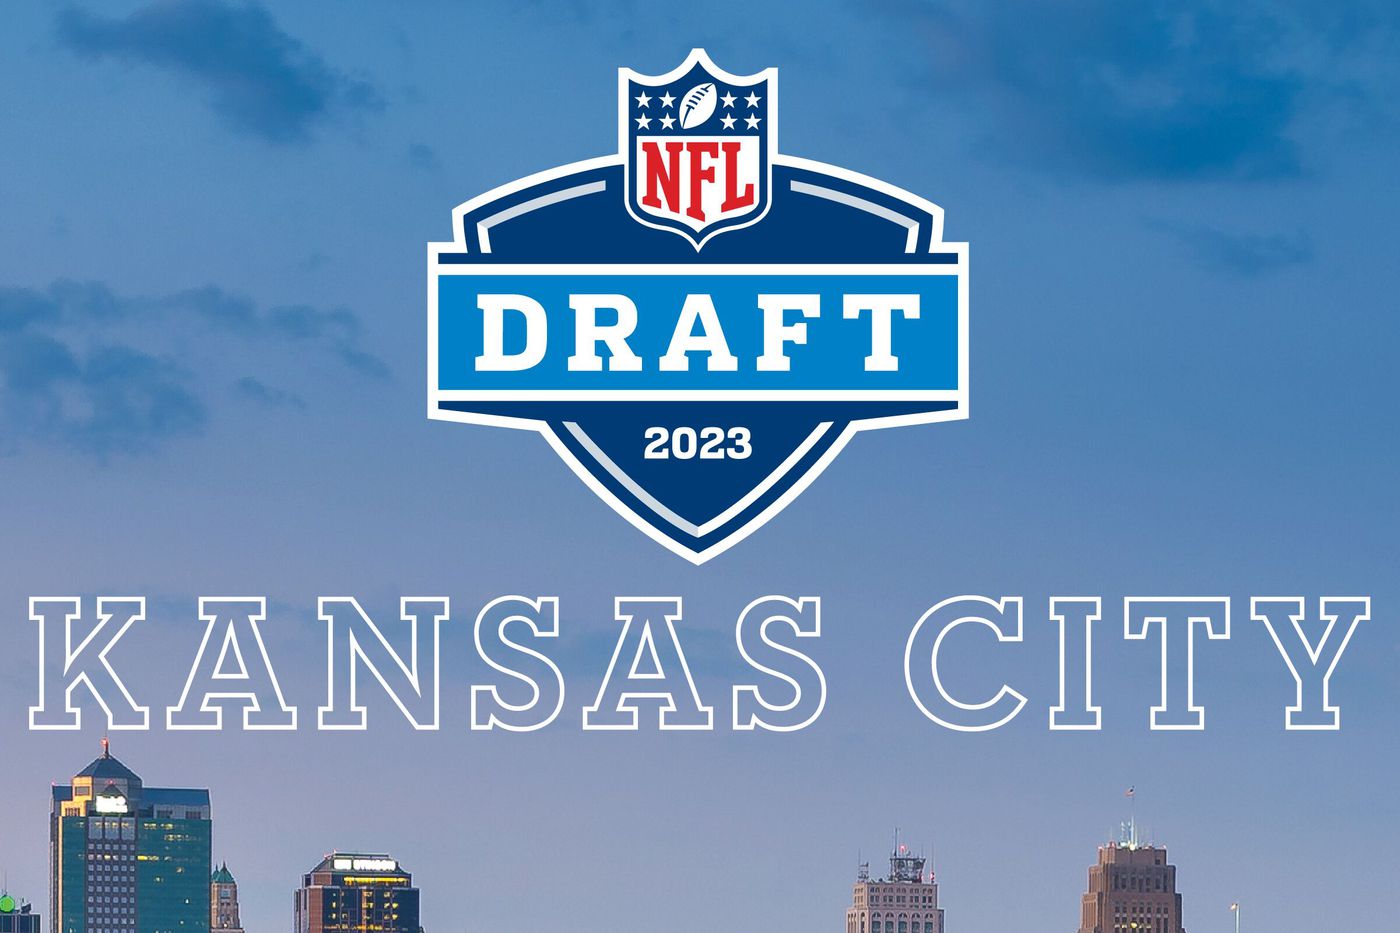 It's really happening: the NFL Draft is coming to Kansas City in